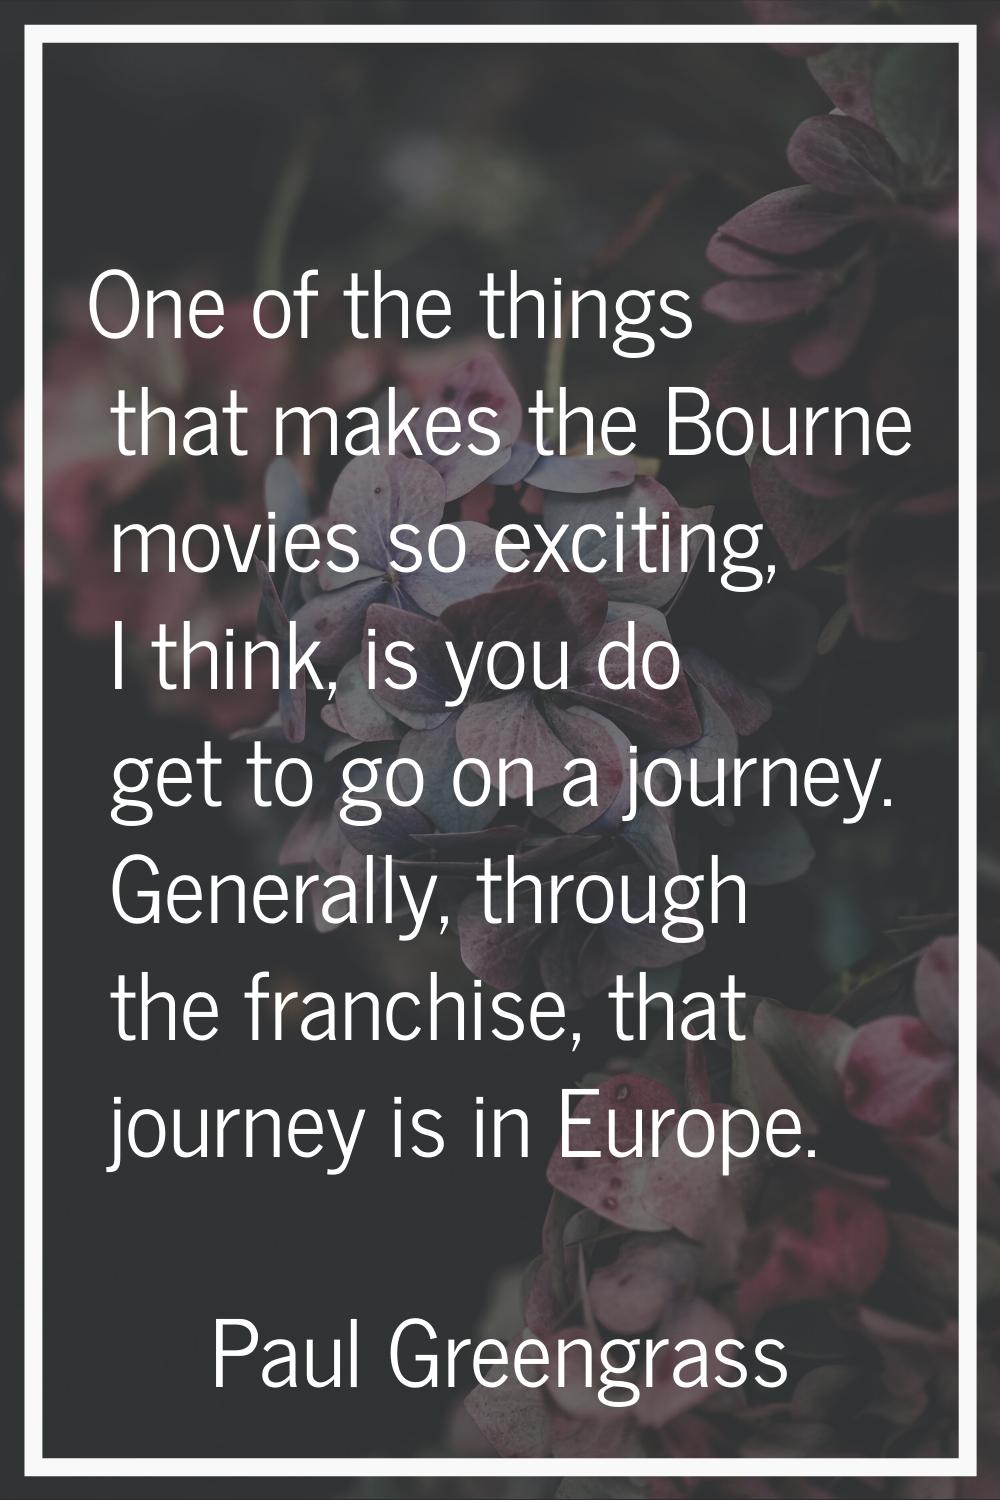 One of the things that makes the Bourne movies so exciting, I think, is you do get to go on a journ